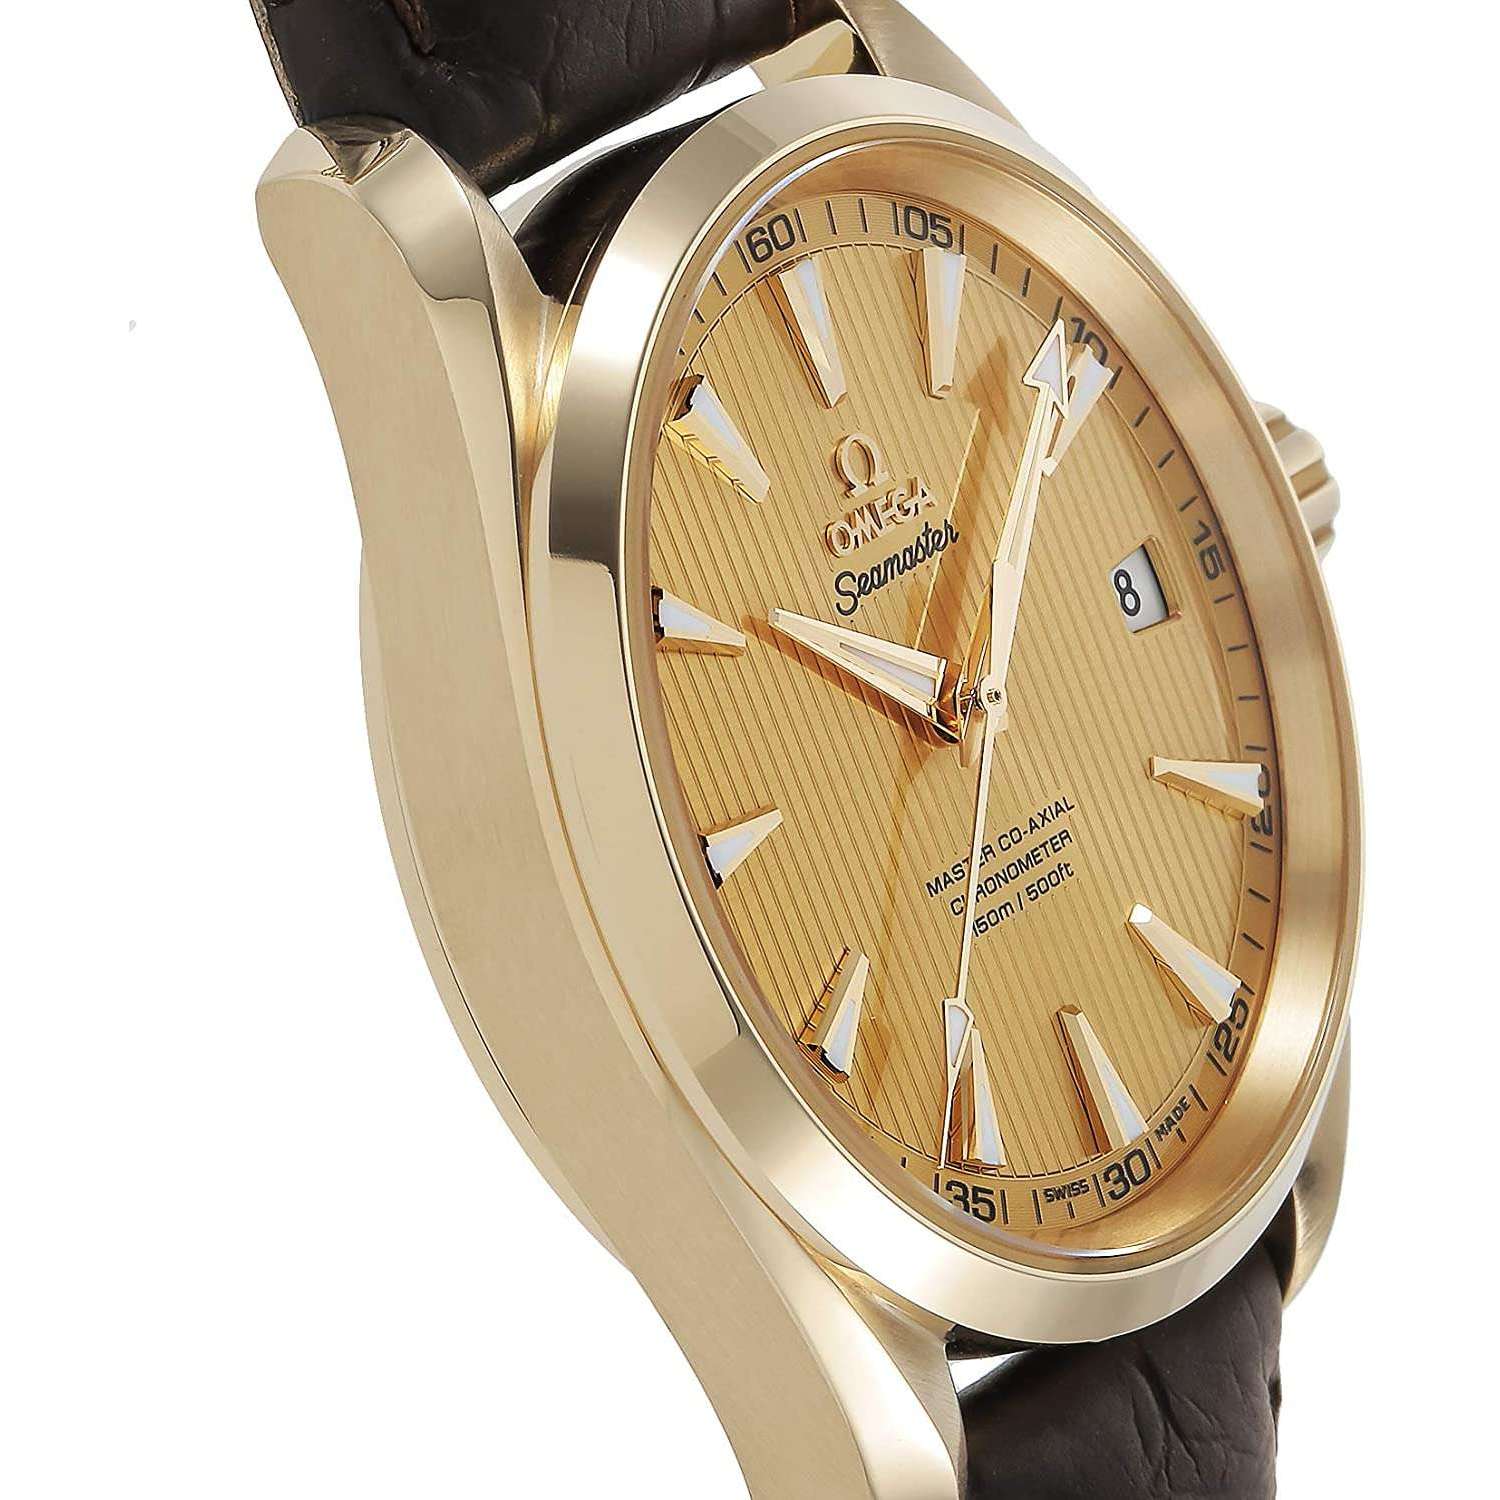 OMEGA SEAMASTER MASTER CO-AXIAL CHRONOMETER 42 MM MEN WATCH 231.53.42.21.08.001 - ROOK JAPAN